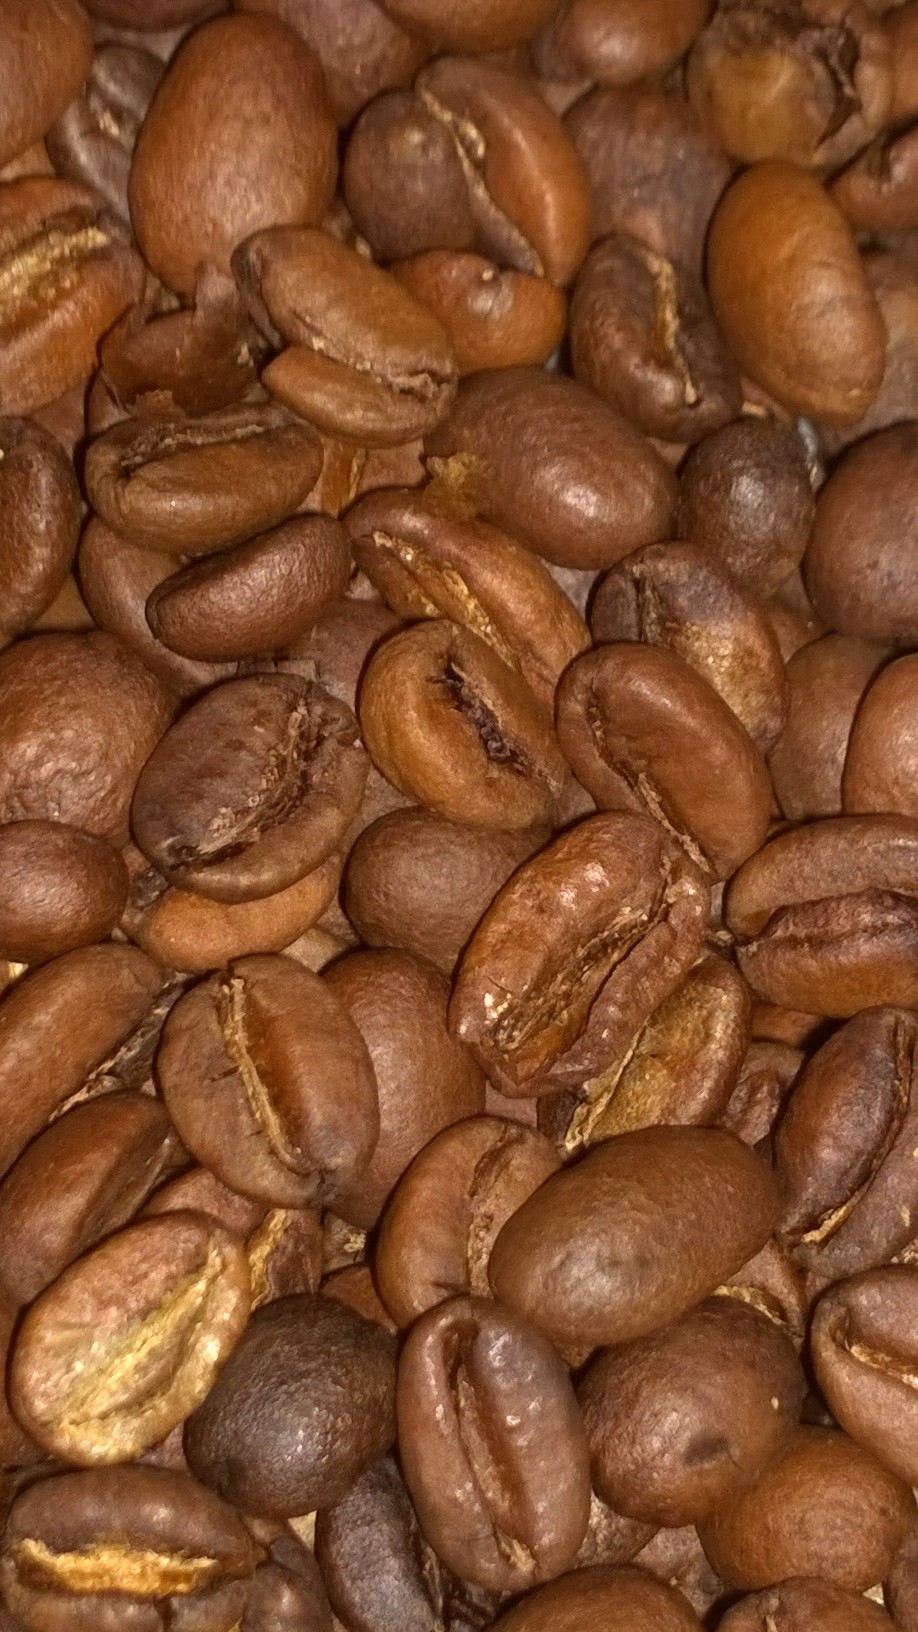 Roasted Coffee Beans 5 Pounds YirgZ Natural